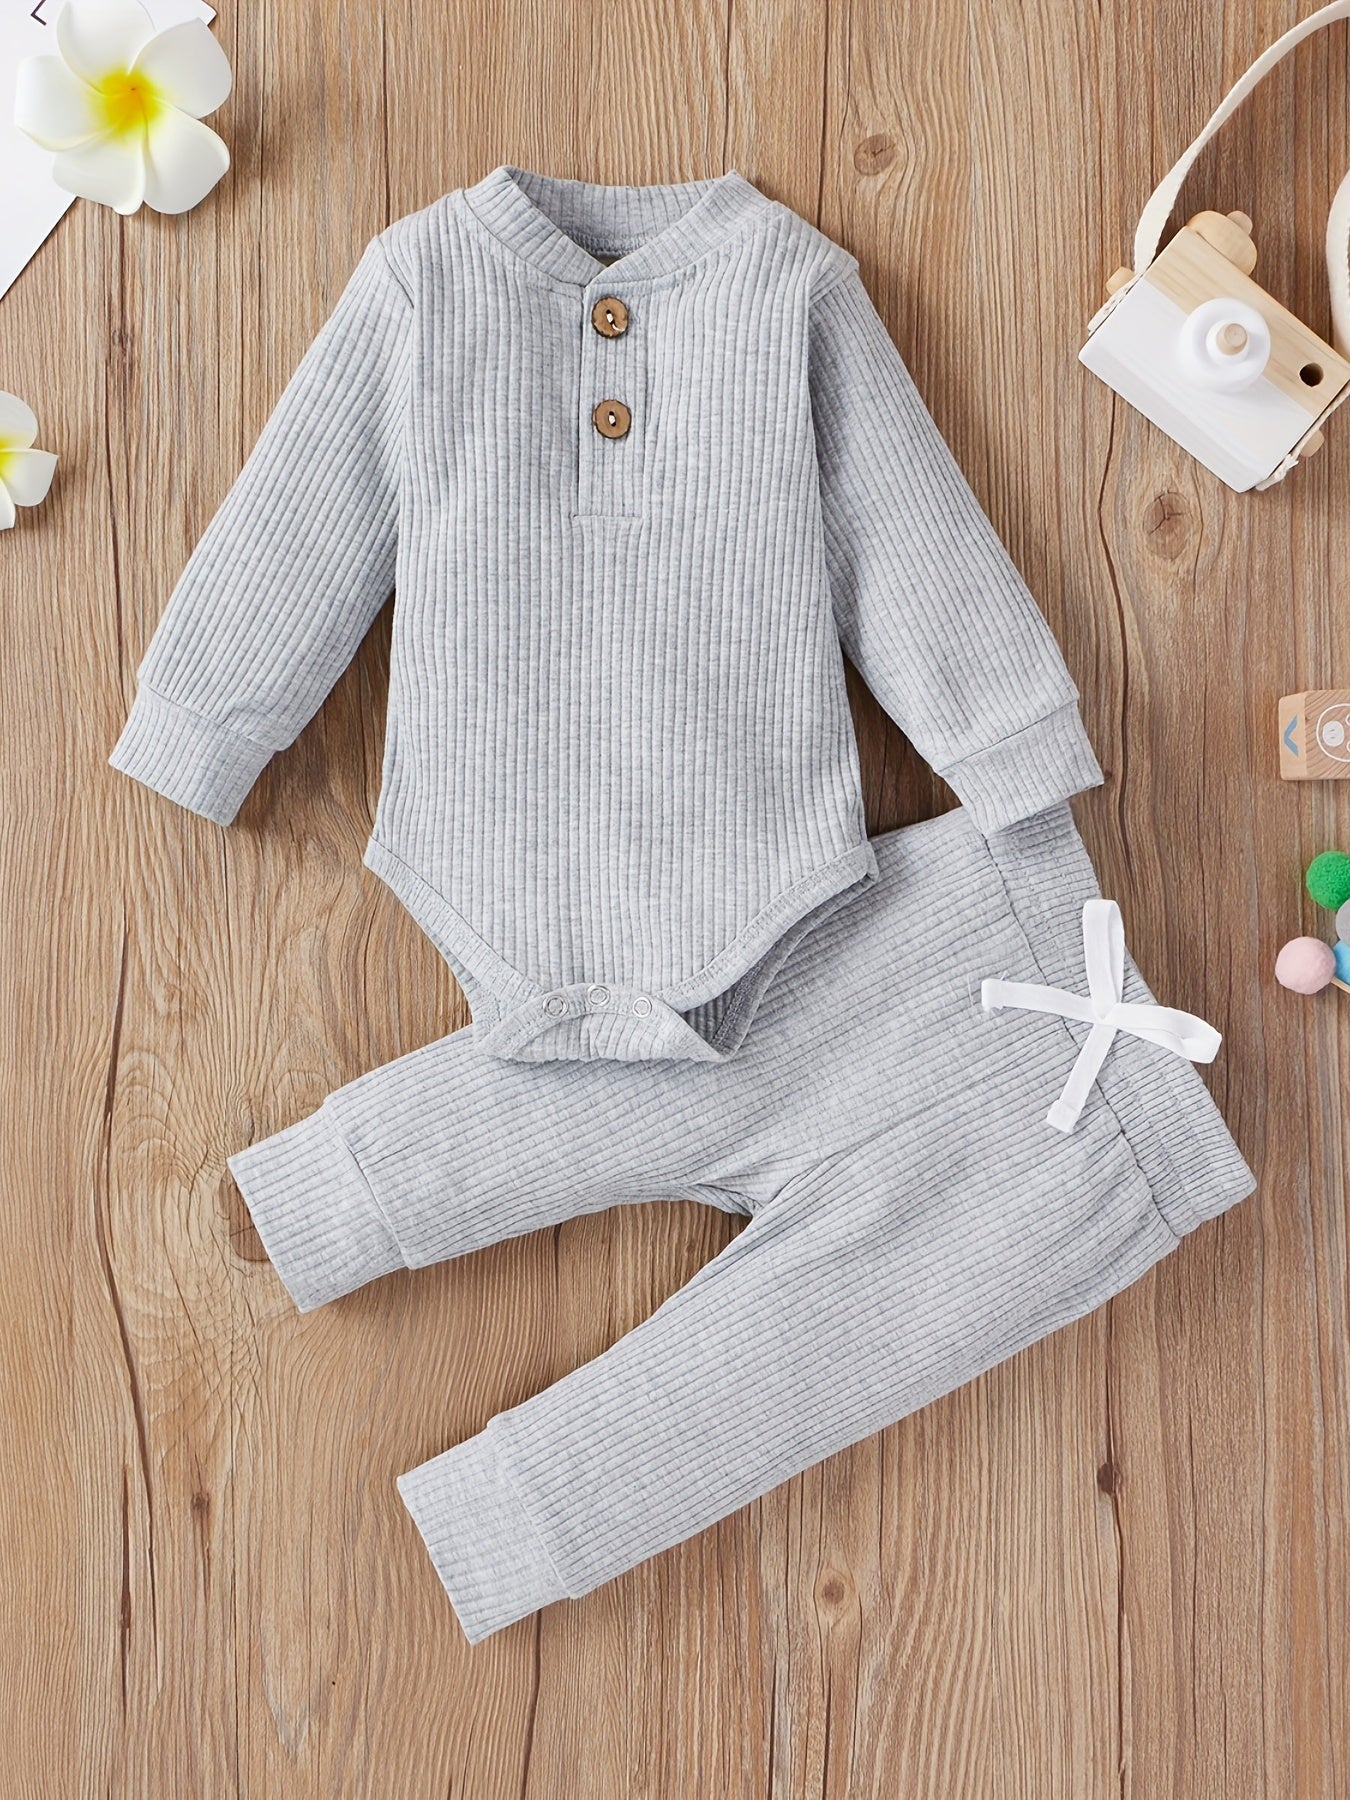 2pcs Baby Infant Boys And Girls Casual Plain Color Long Sleeve Onesie & Pants Set Clothes